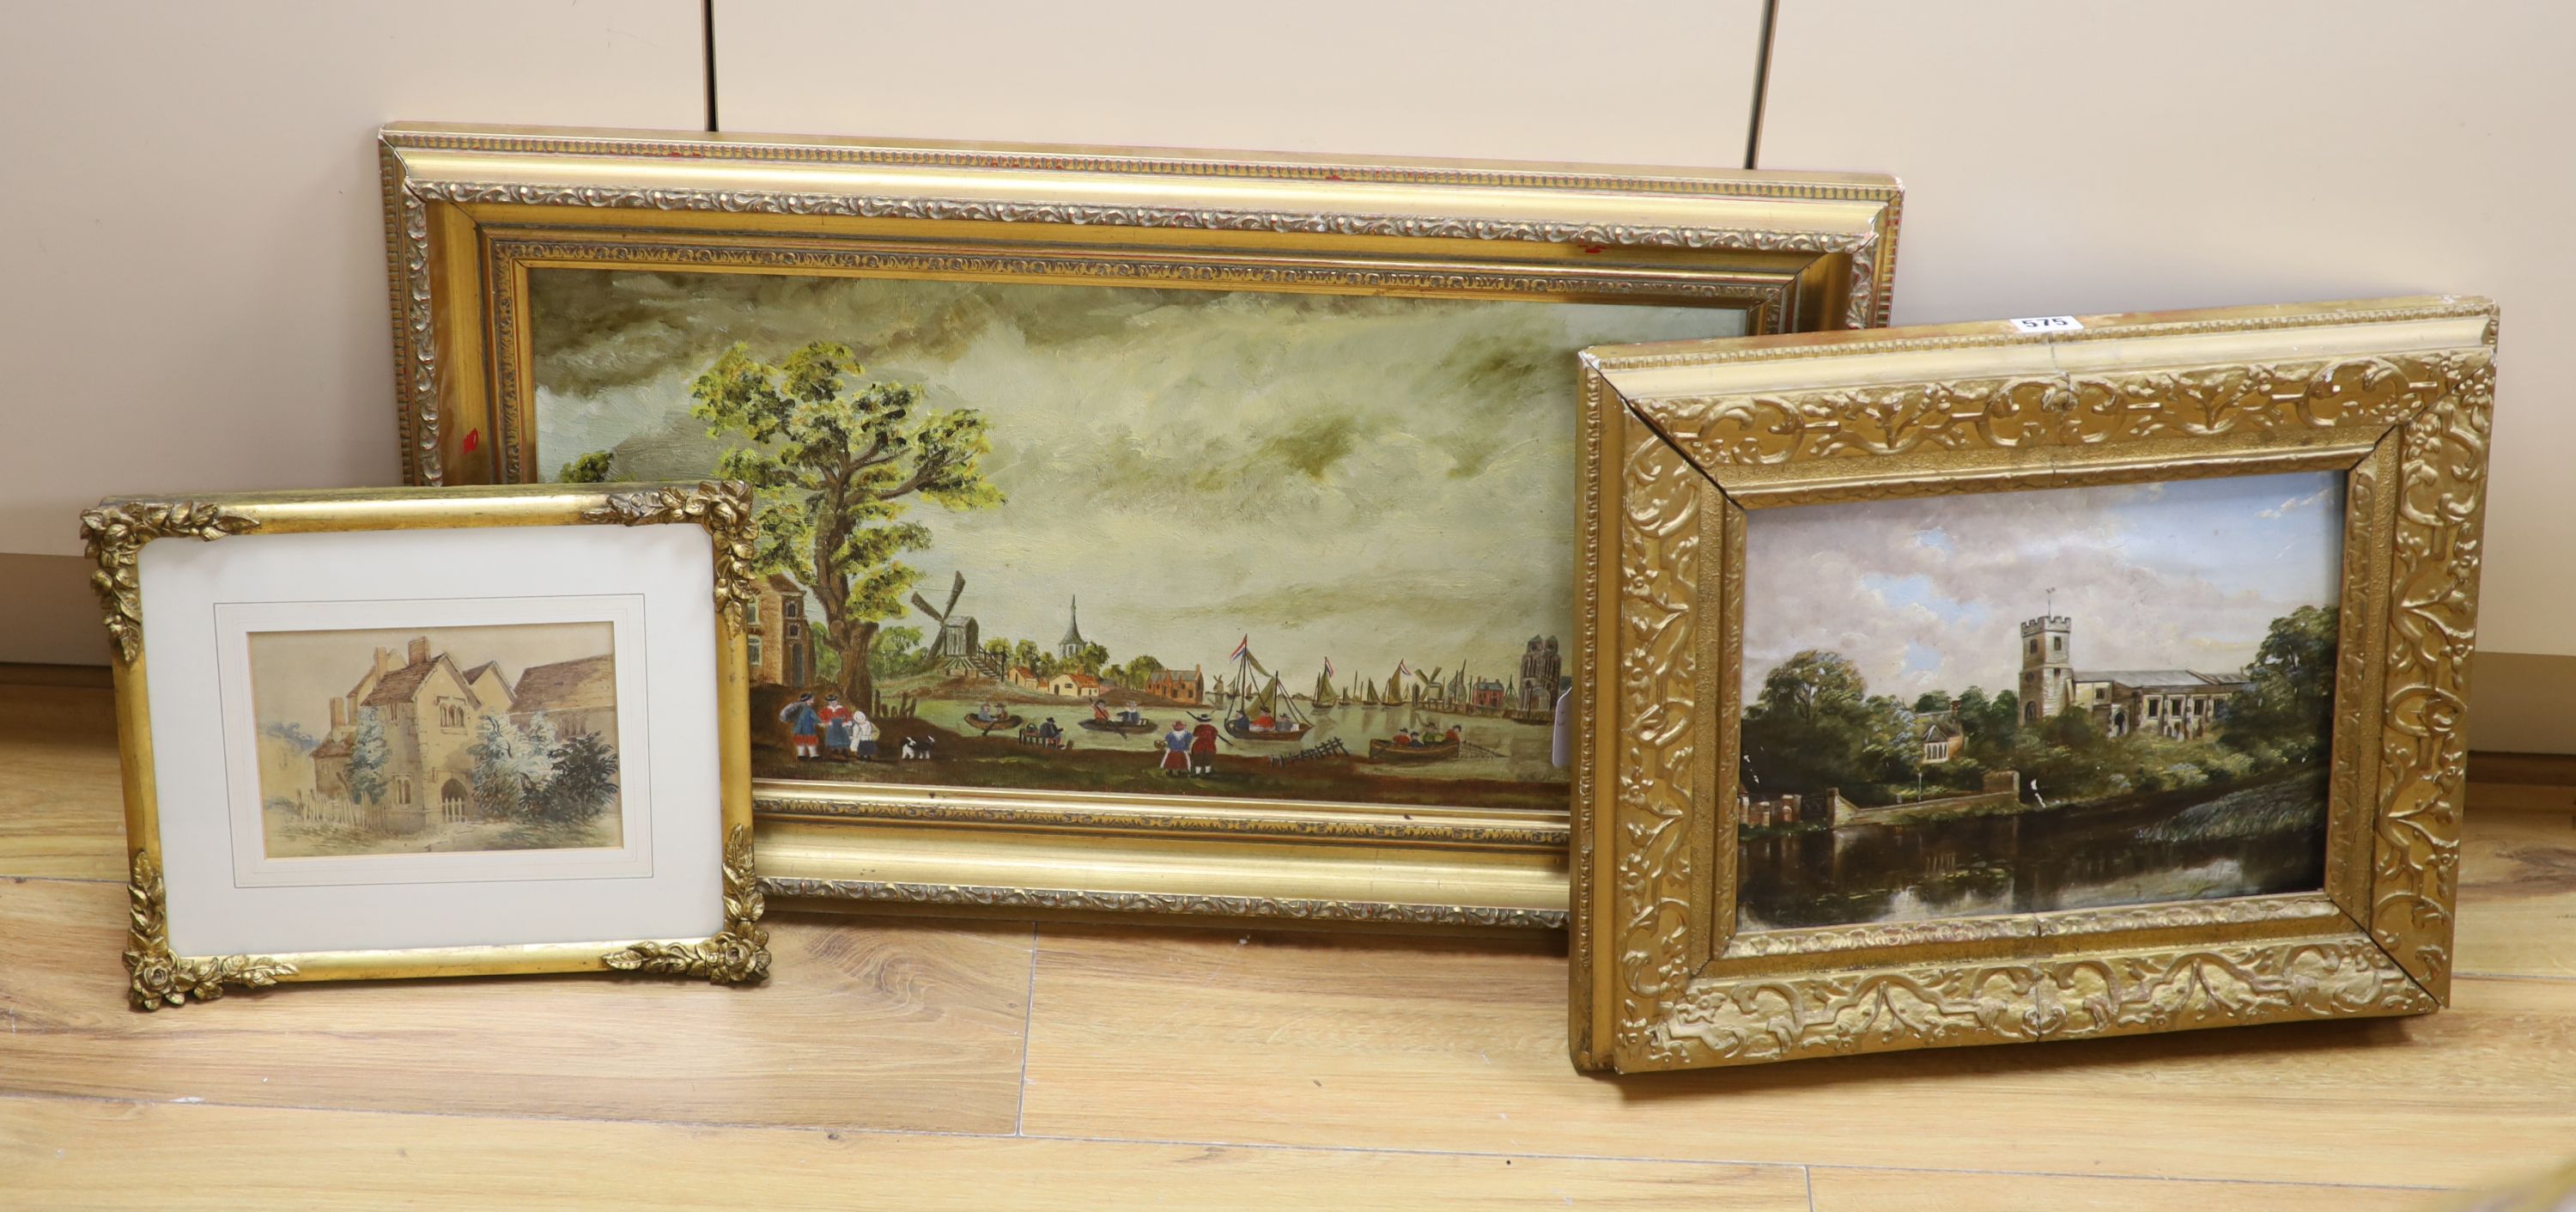 B.A. Richmond, oil on canvas, 17th century style Dutch river landscape, 30 x 60cm, an oil of a riverside church, c.1900 and a small watercolour of a cottage